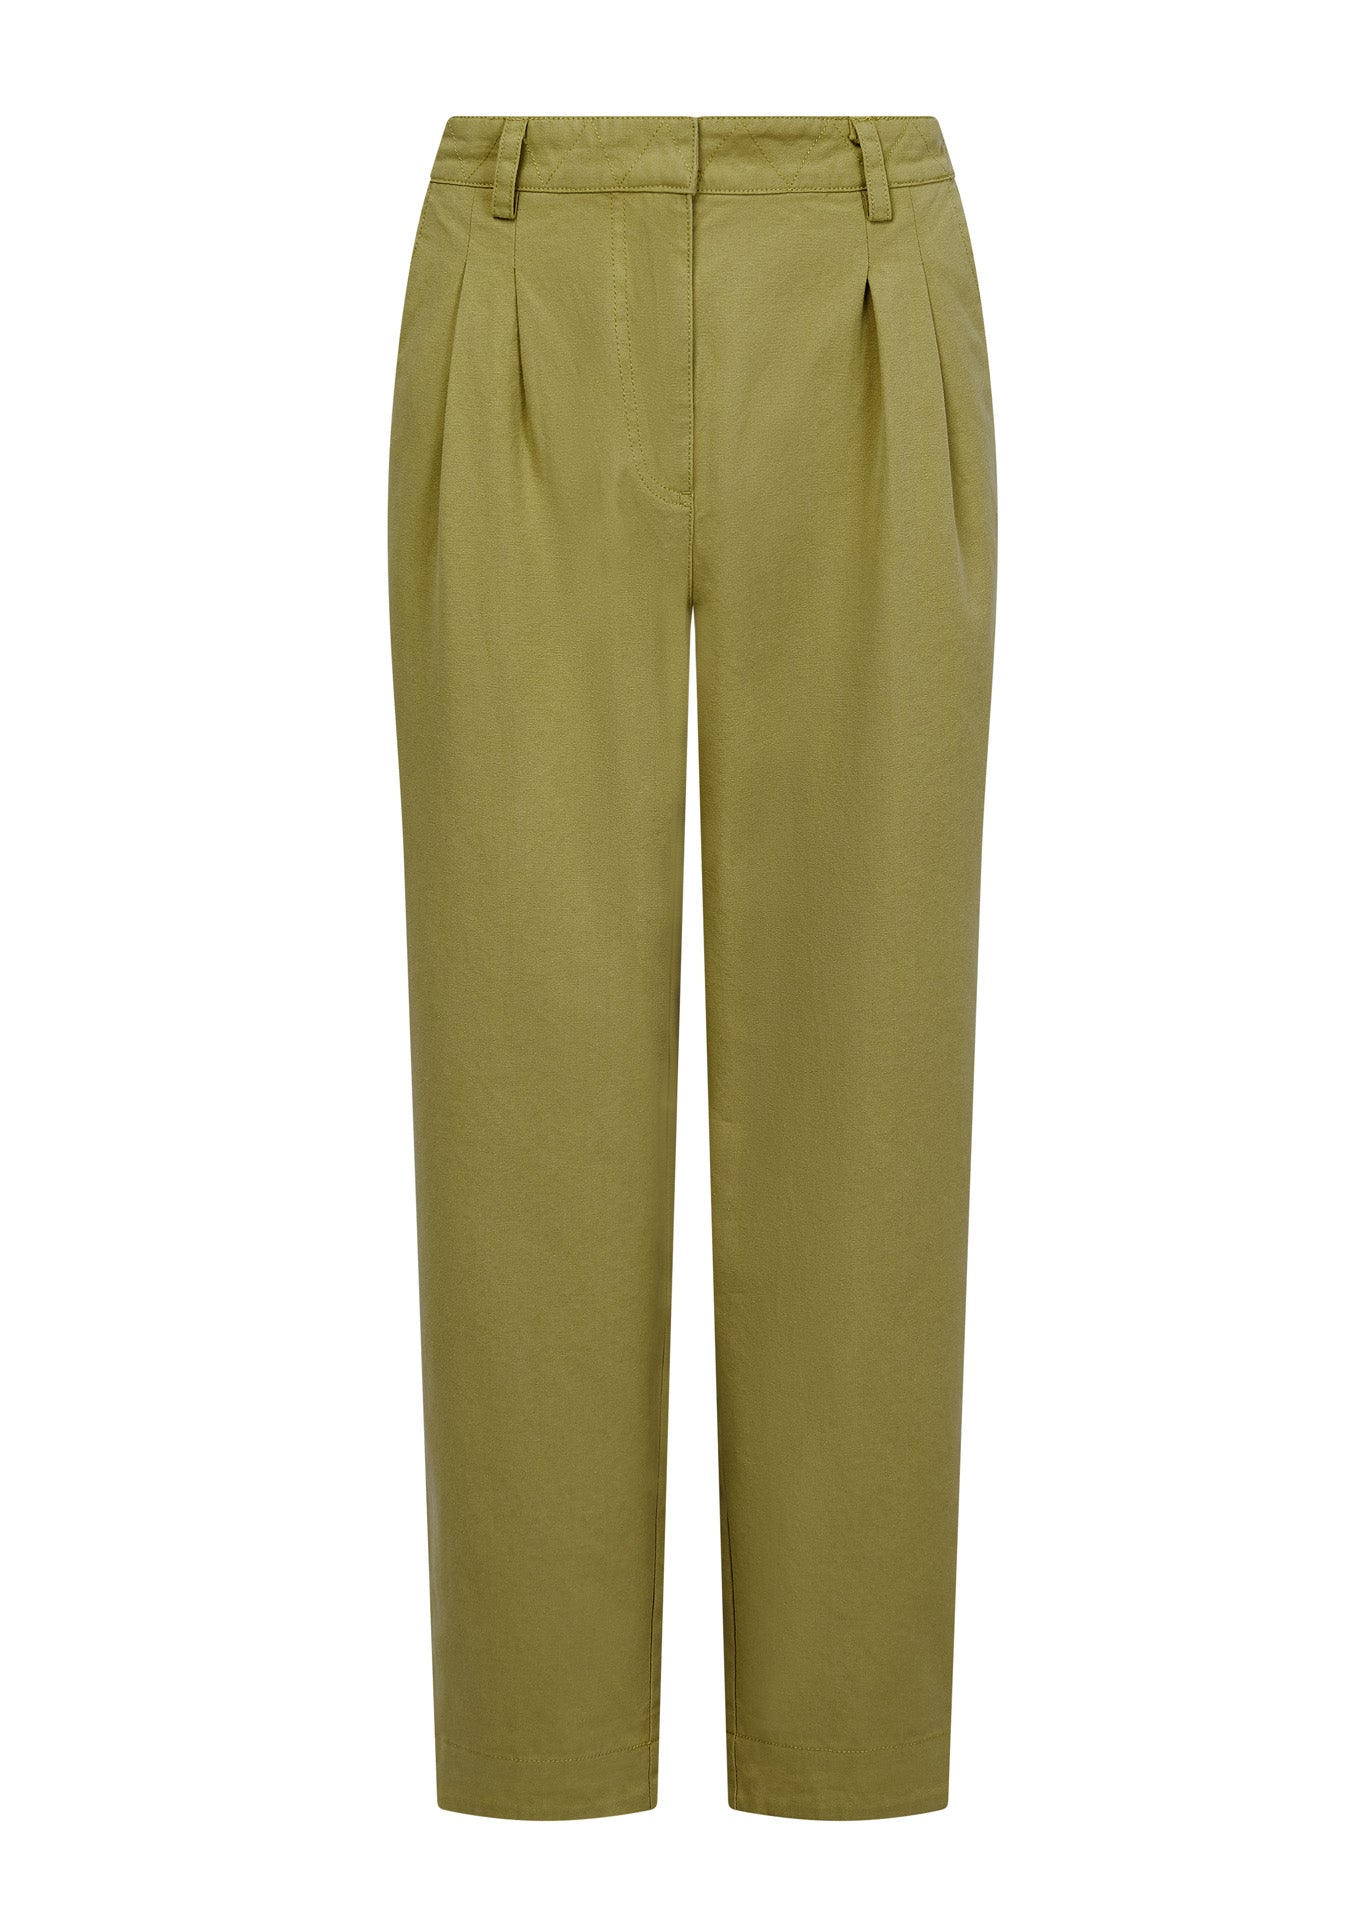 Khaki green trousers Olia made from 100% organic cotton by Komodo